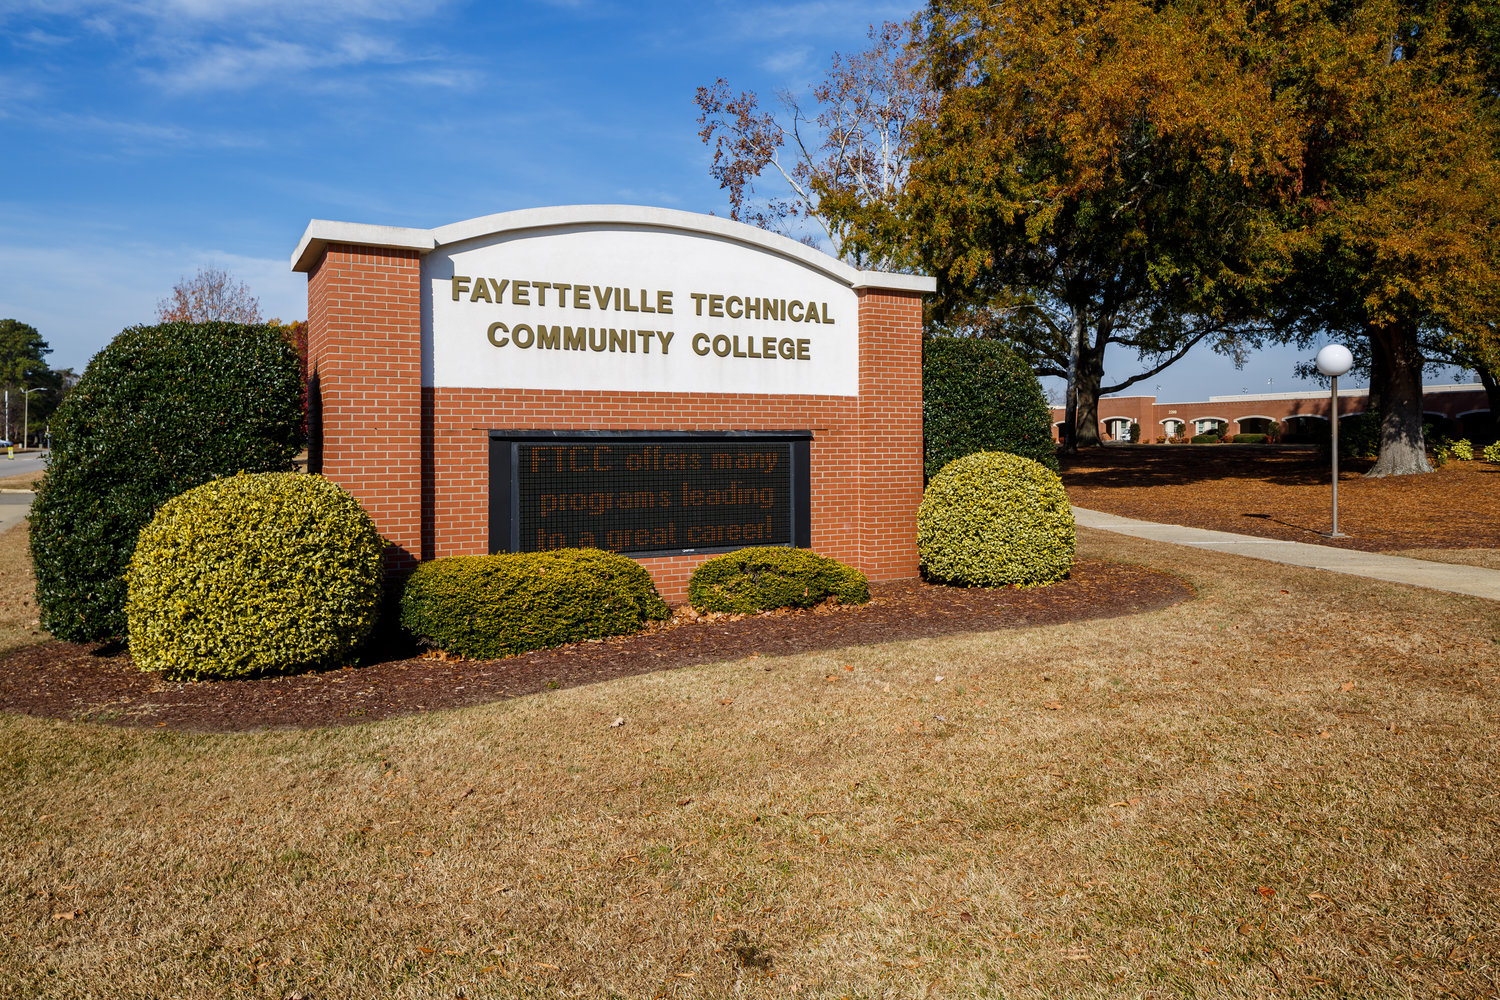 Fayetteville Technical Community College will host a team from the N.C. Department of Information Technology for a 'Digital Divide' listening tour.